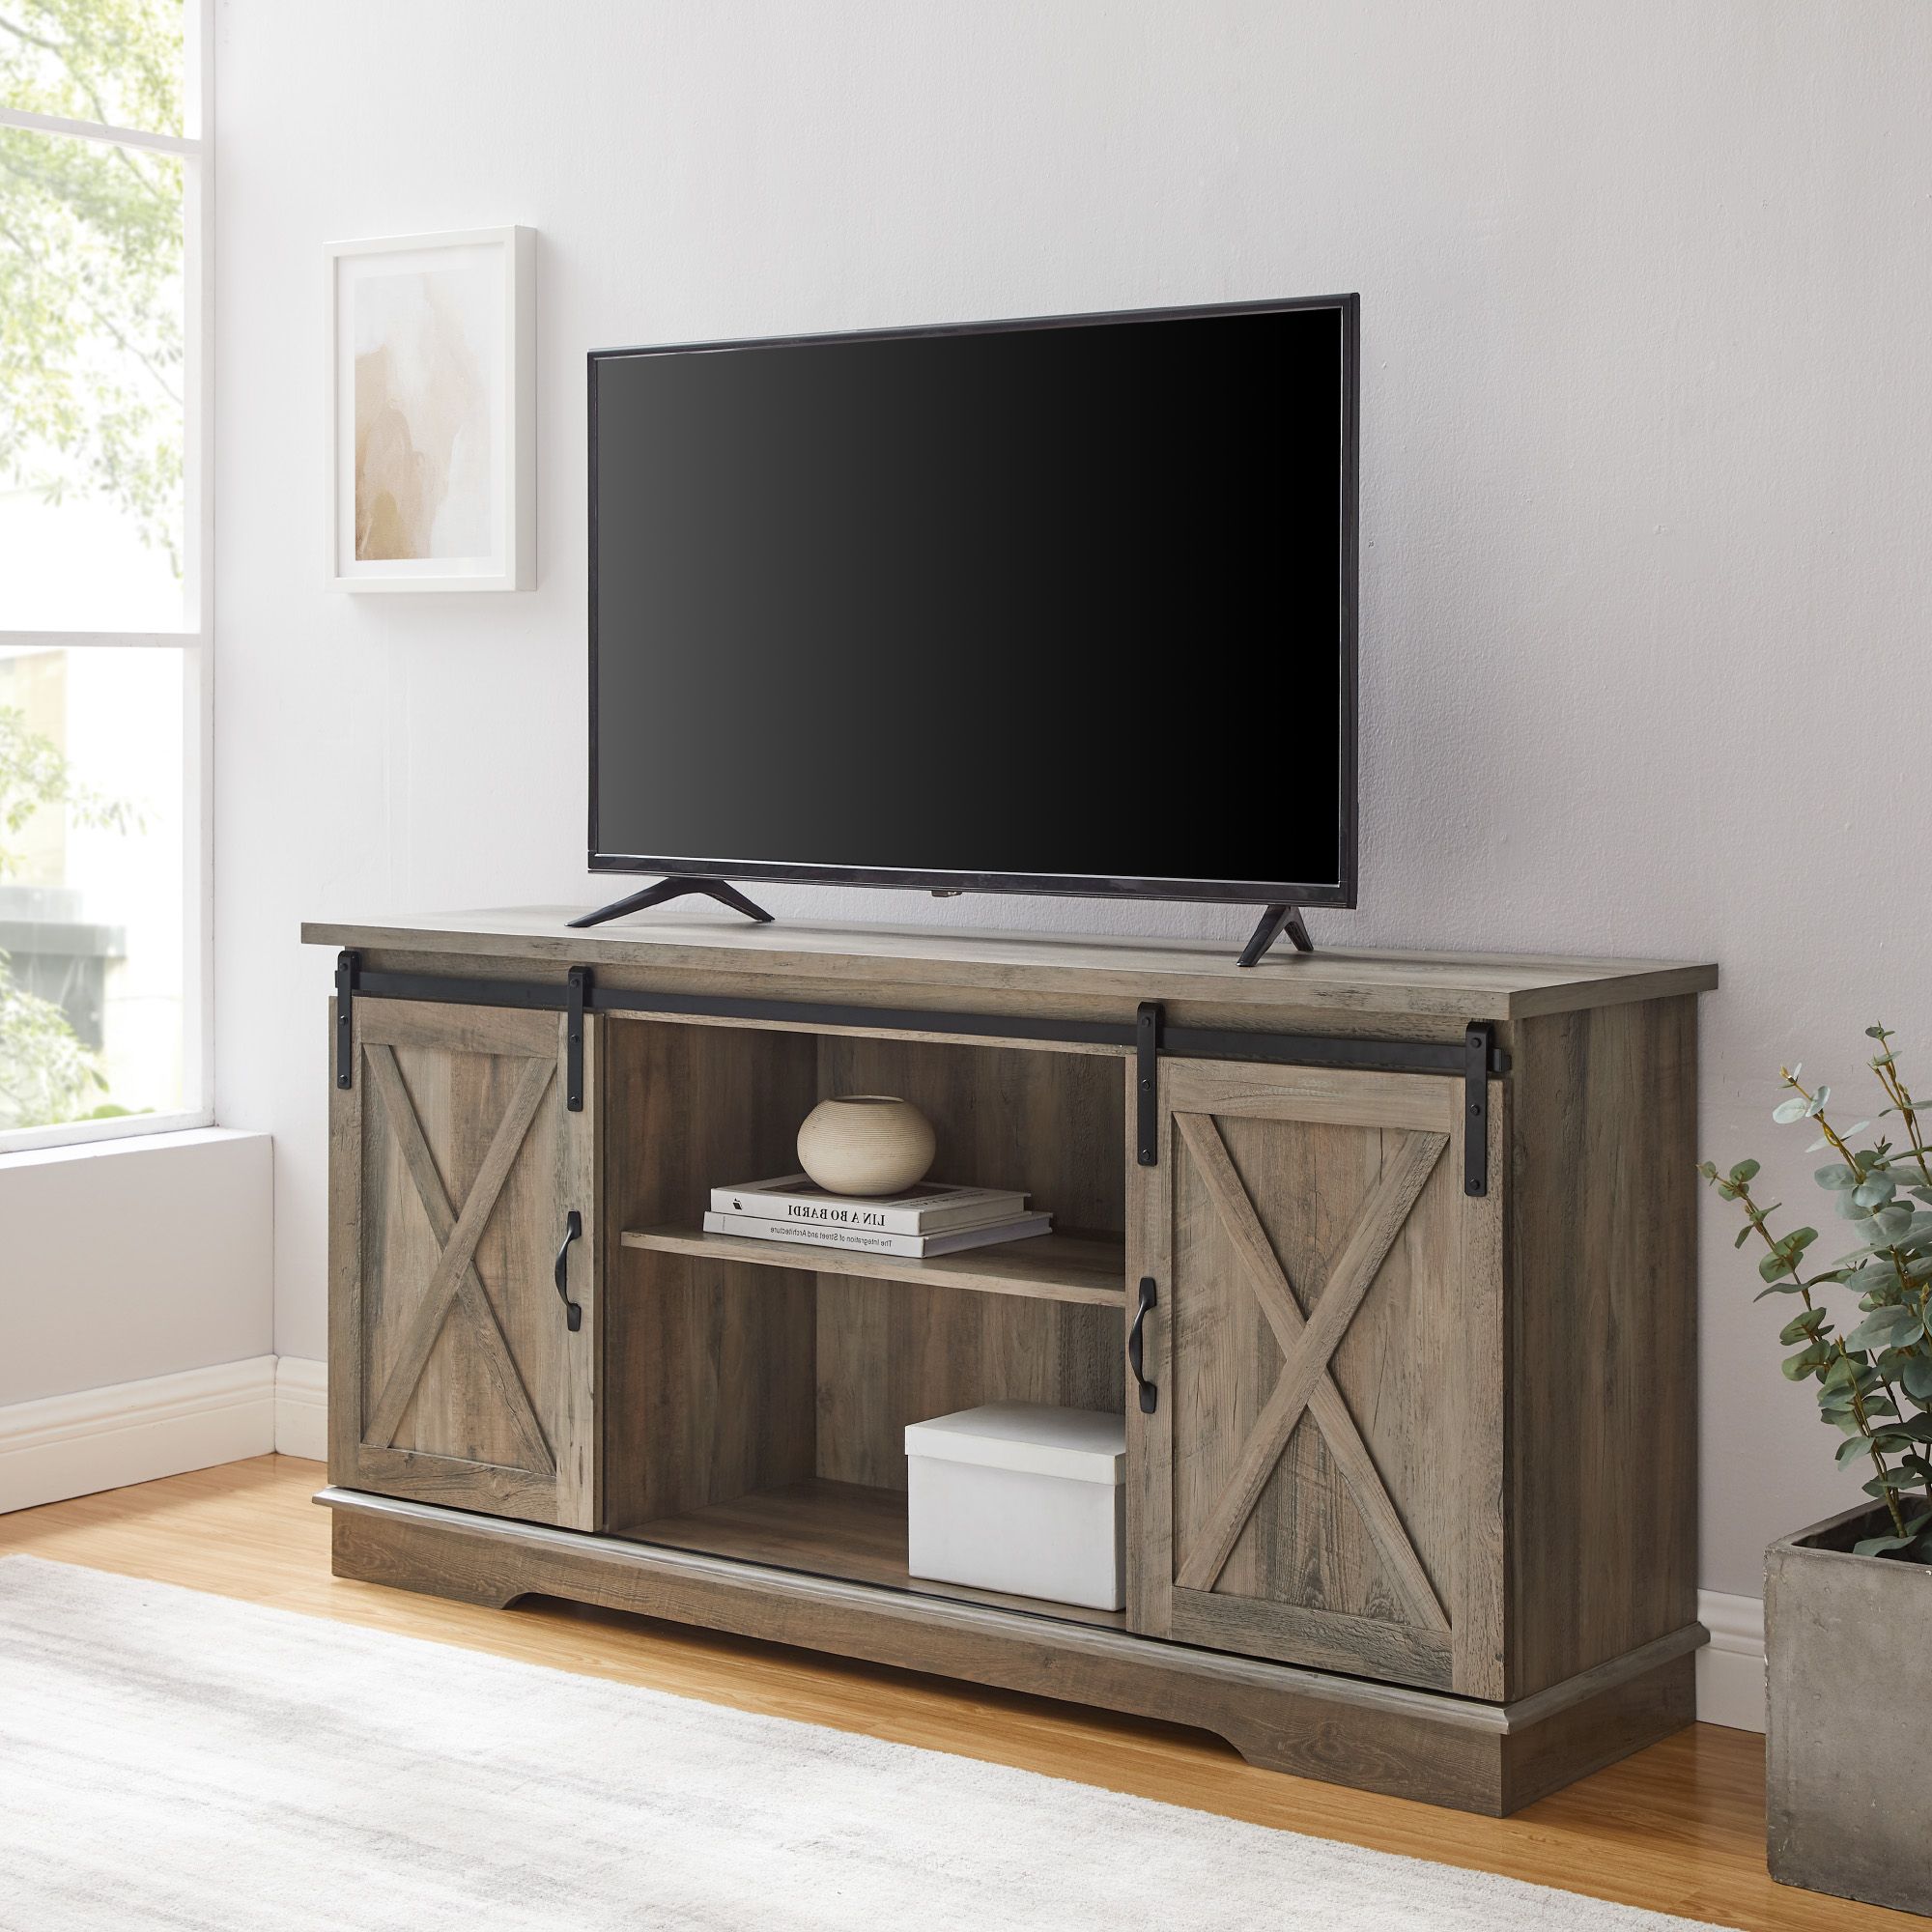 Woven Paths Farmhouse Sliding Barn Door Tv Stand For Tvs Pertaining To Wolla Tv Stands For Tvs Up To 65" (View 2 of 20)